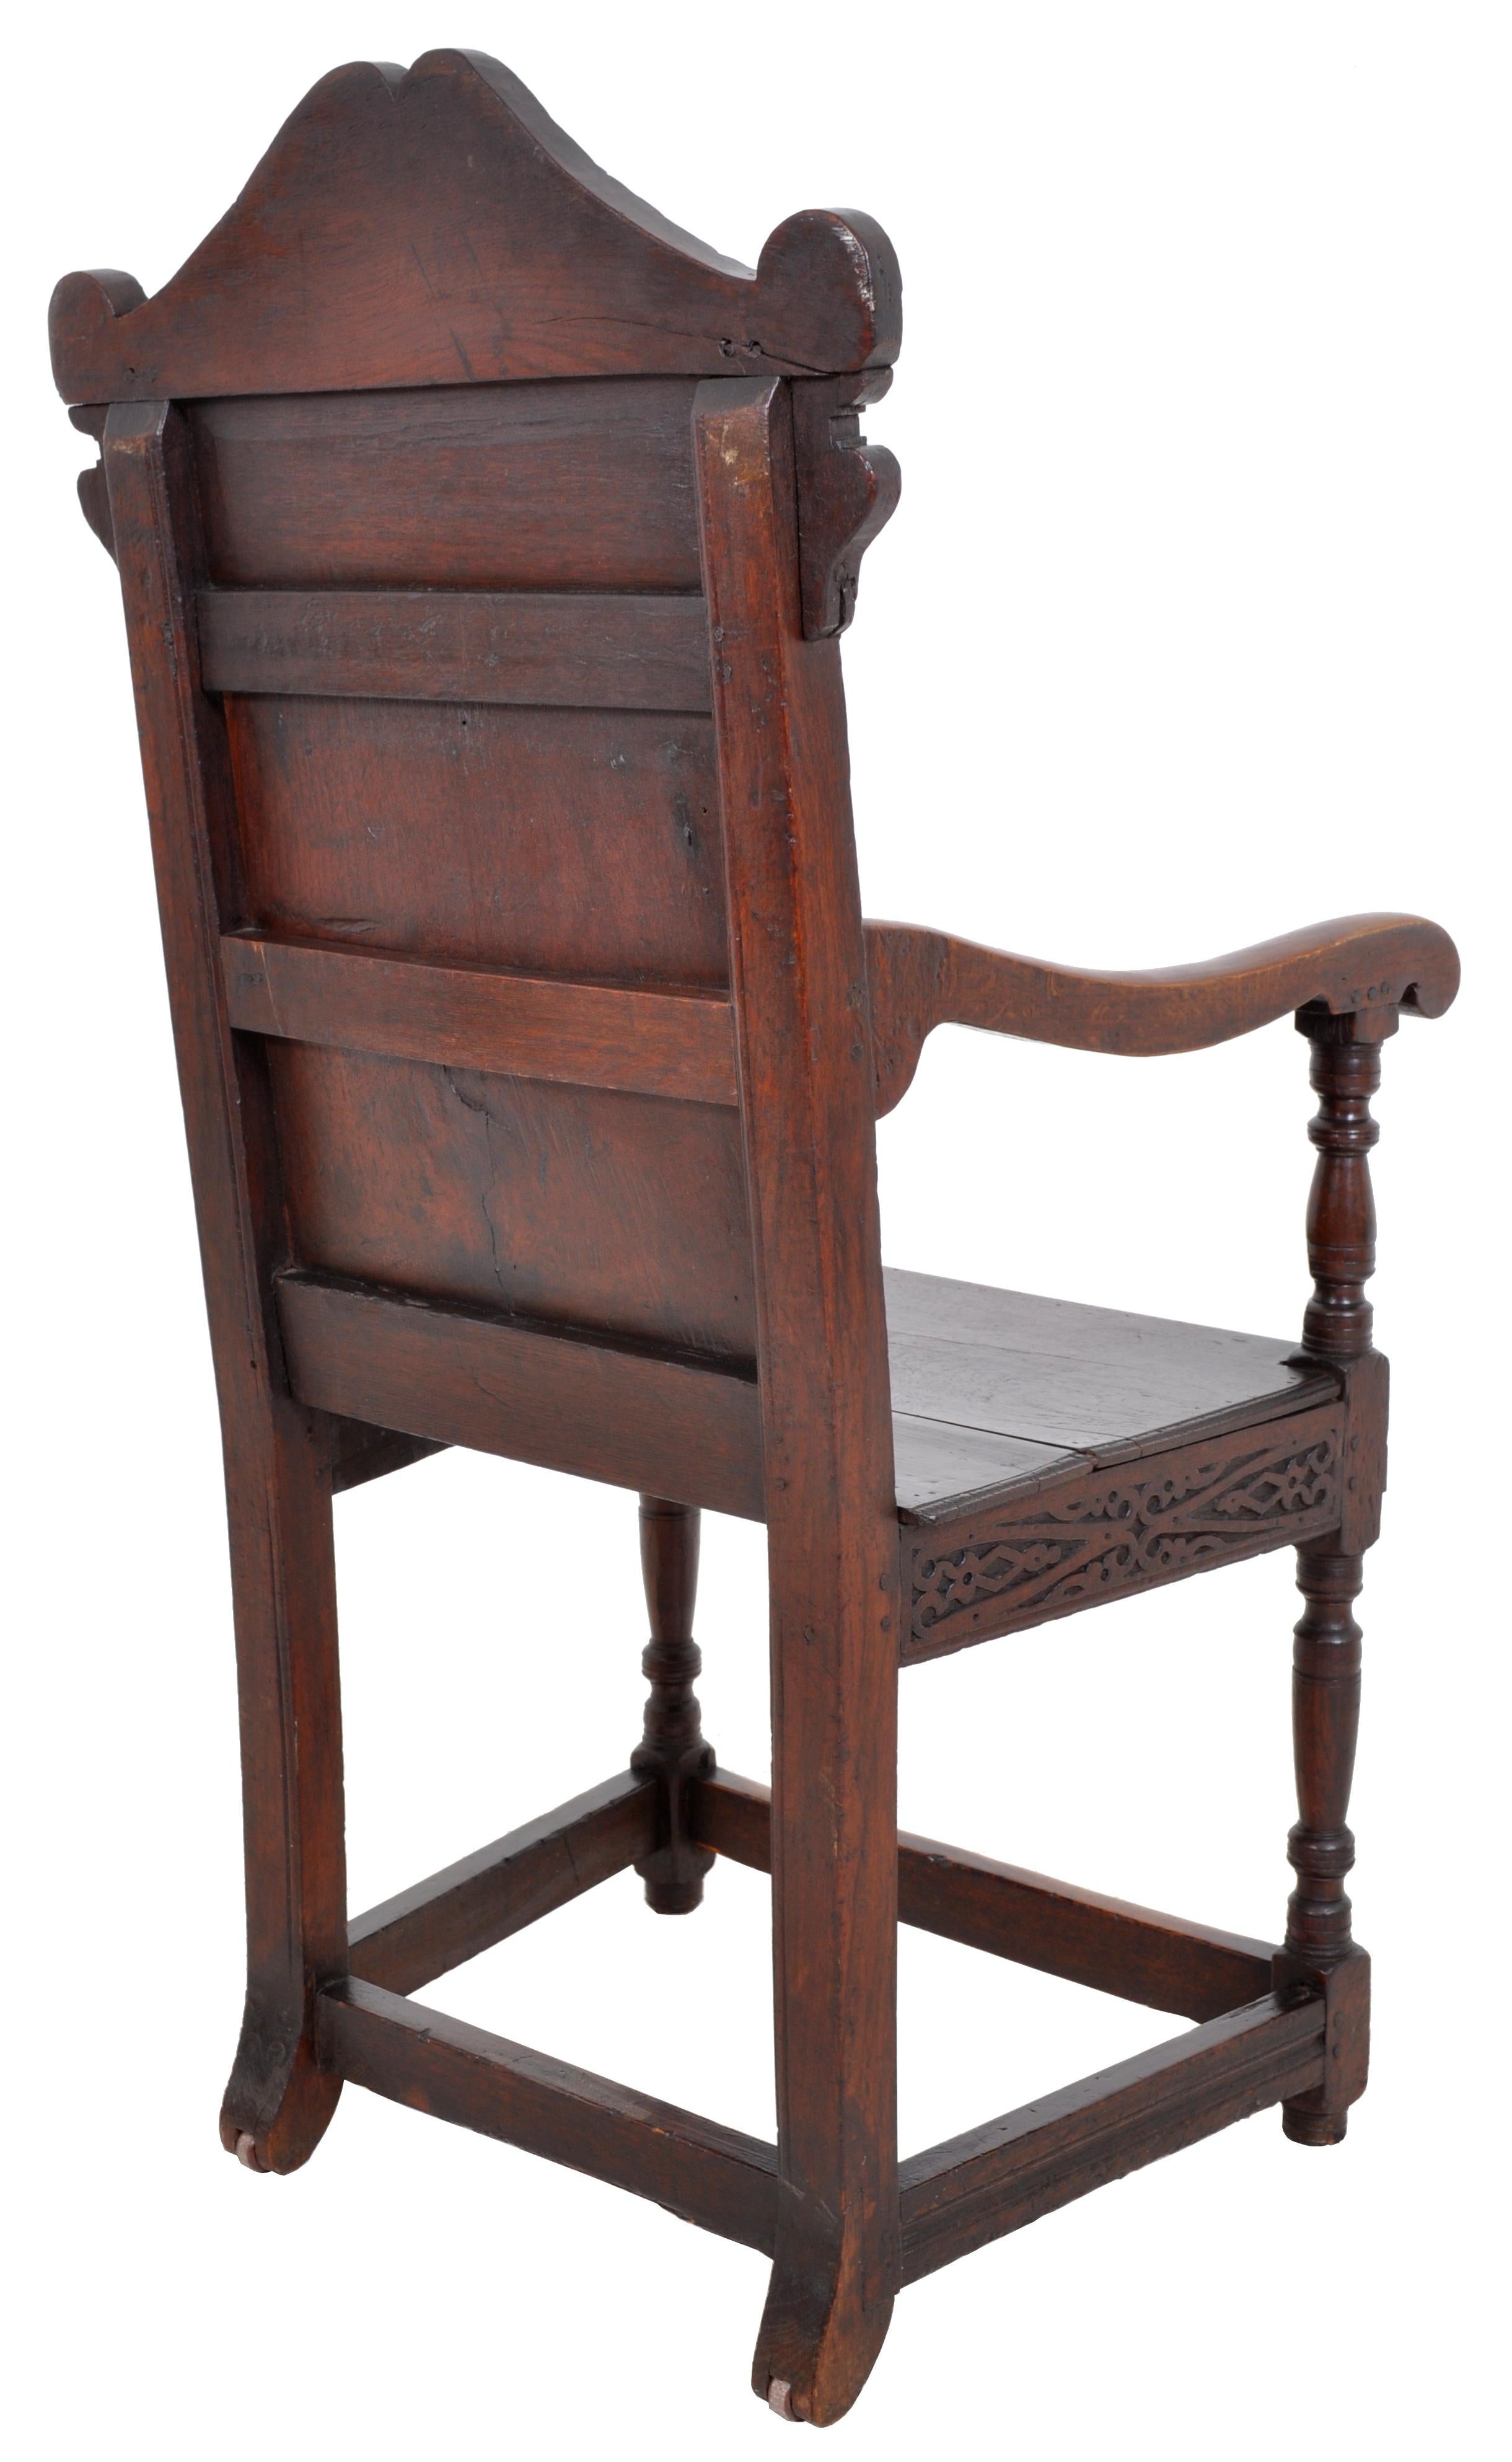 Antique 17th Century Charles II Yorkshire Carved Inlaid Oak Wainscot Chair, 1670 1